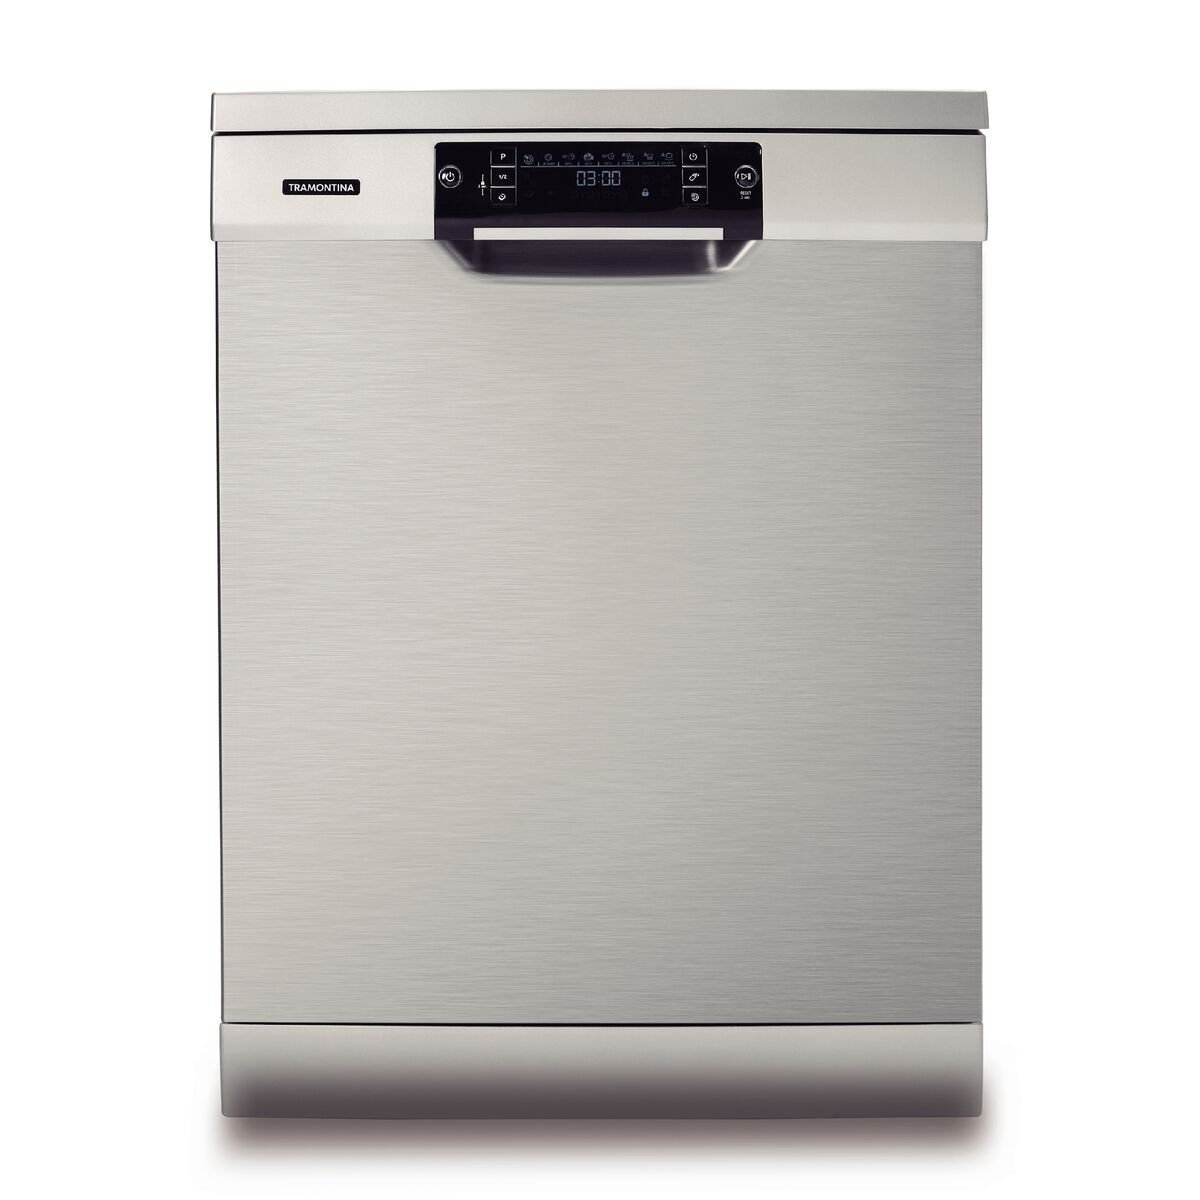 Tramontina Inox S15X 60 stainless steel dishwasher with capacity for 15 standard place settings 220 V